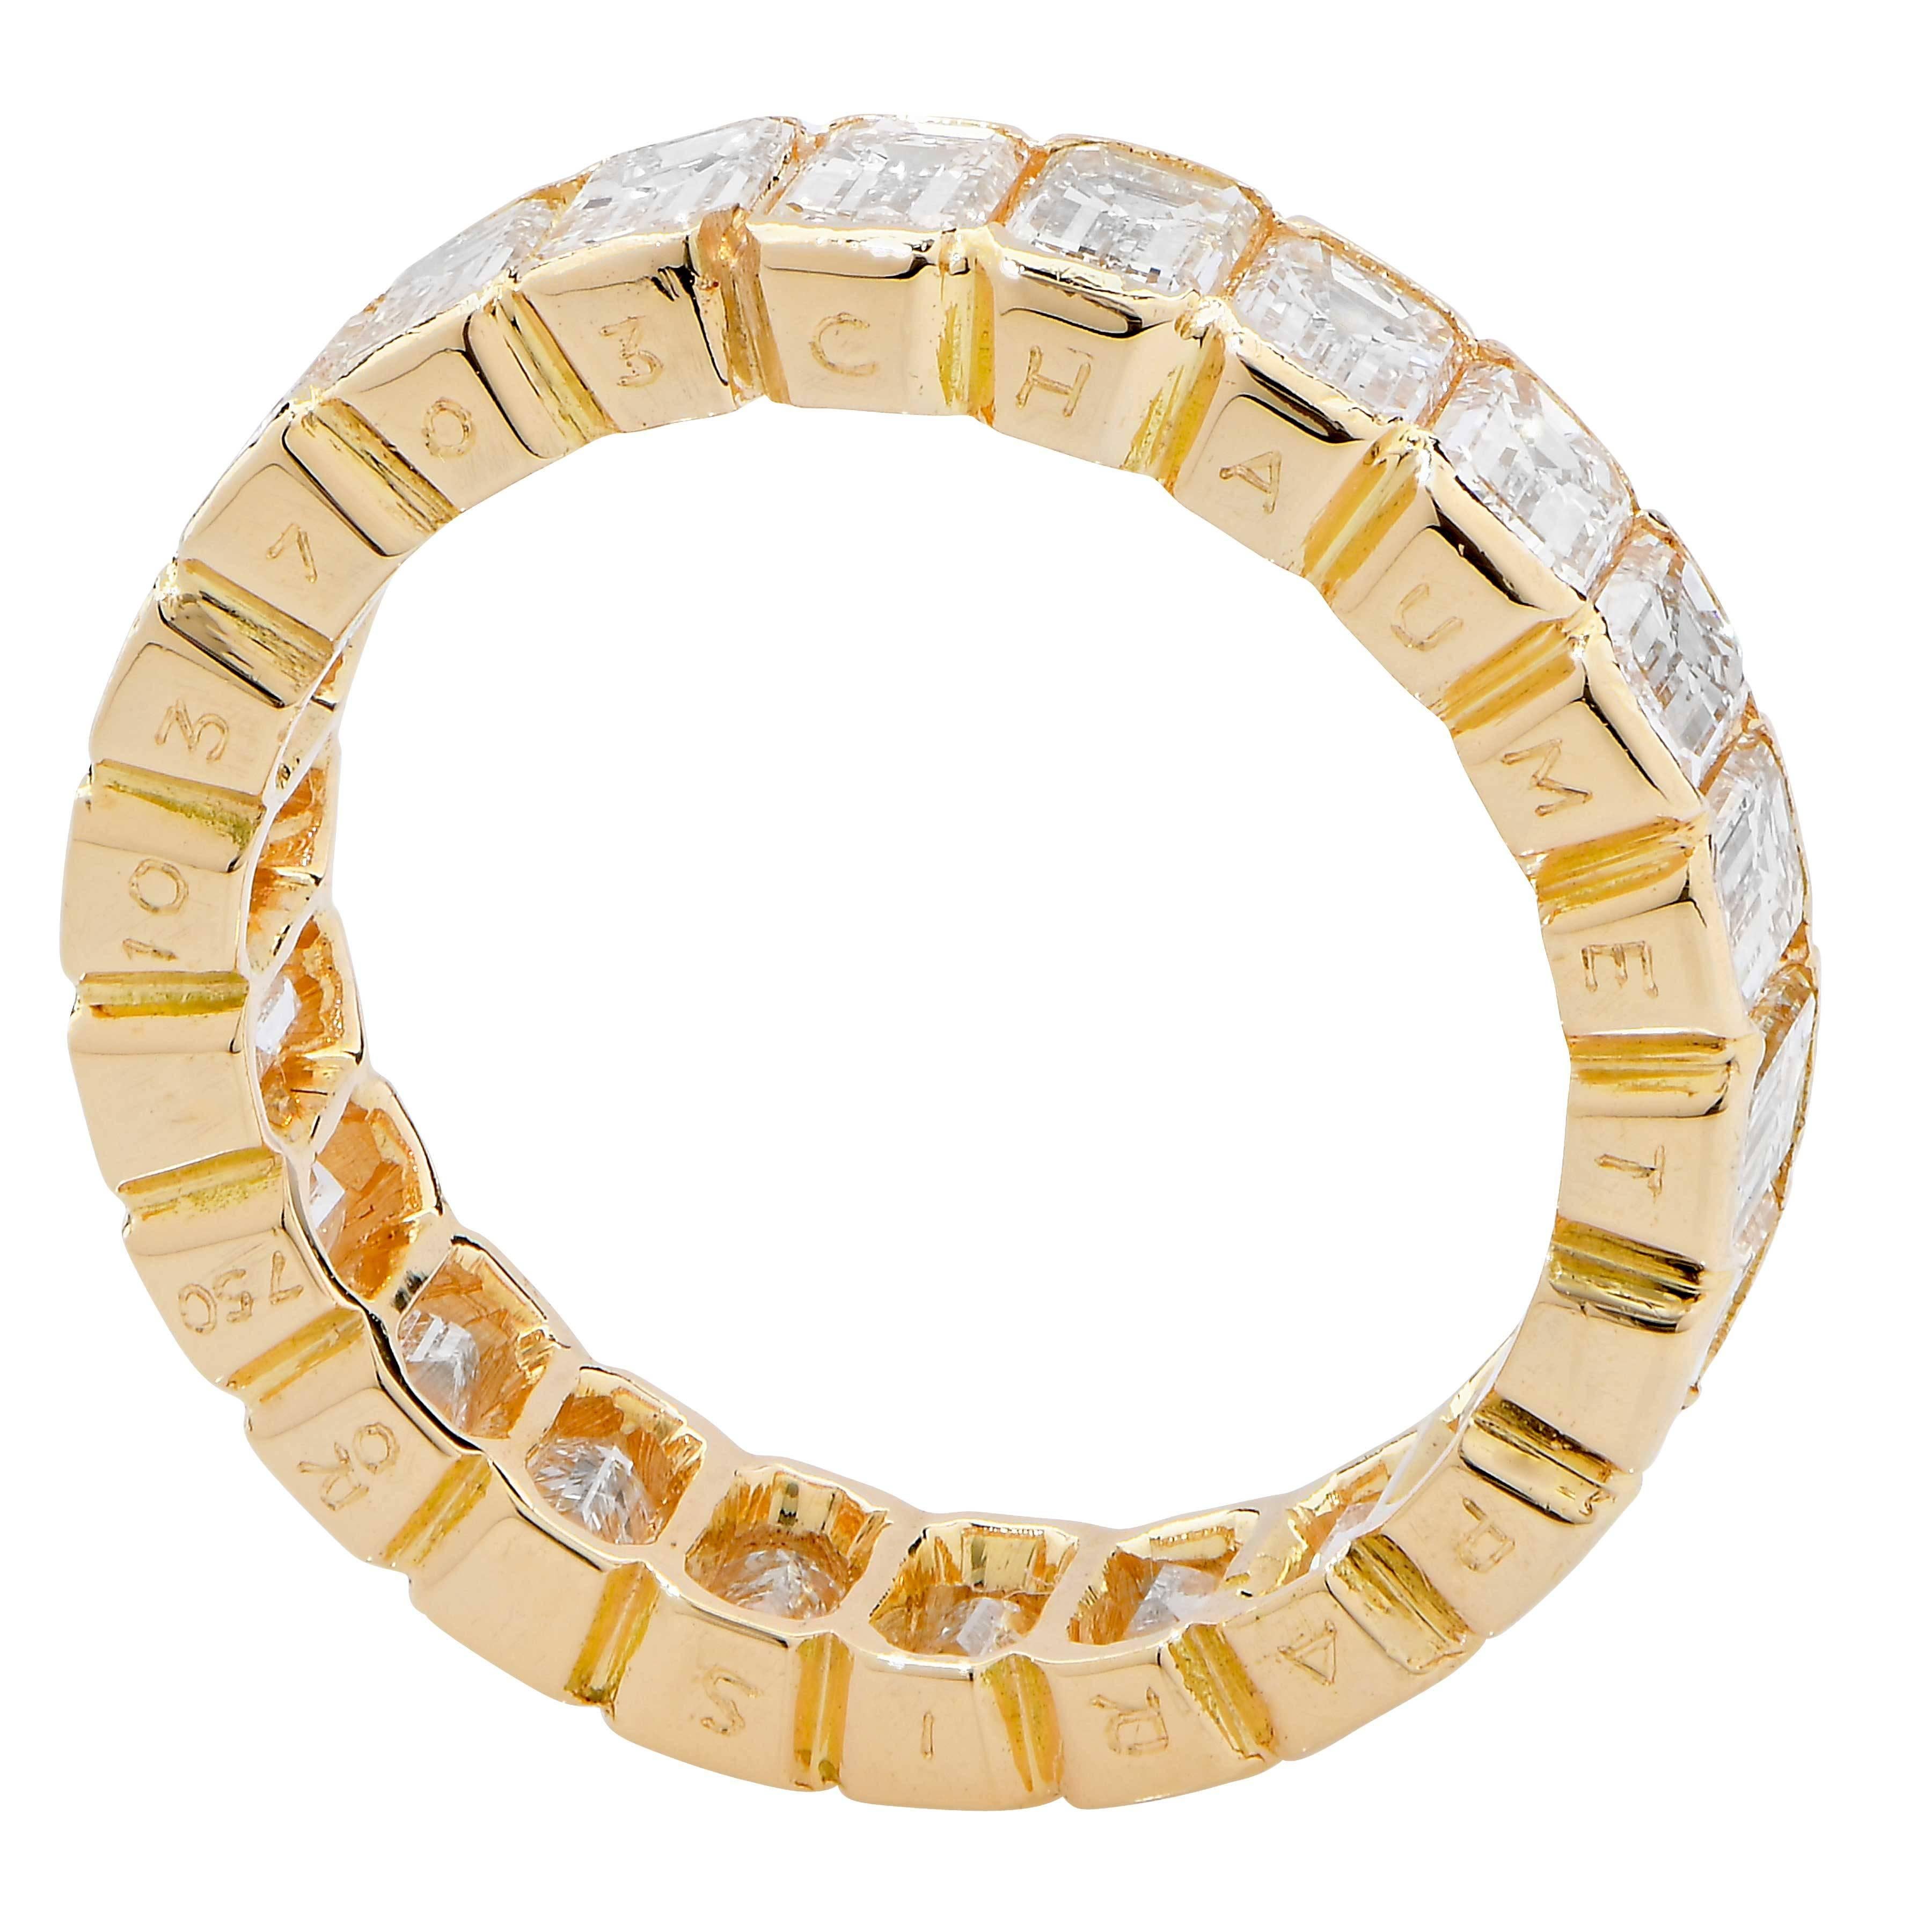 4 Carat Emerald cut diamond eternity band by Chaumet, Paris in 18 Karat Yellow Gold.
This wonderful eternity band features 22 emerald cut diamonds F/G in color VS clarity with a total estimated weight of 4 carats. The diamonds are partially bezel